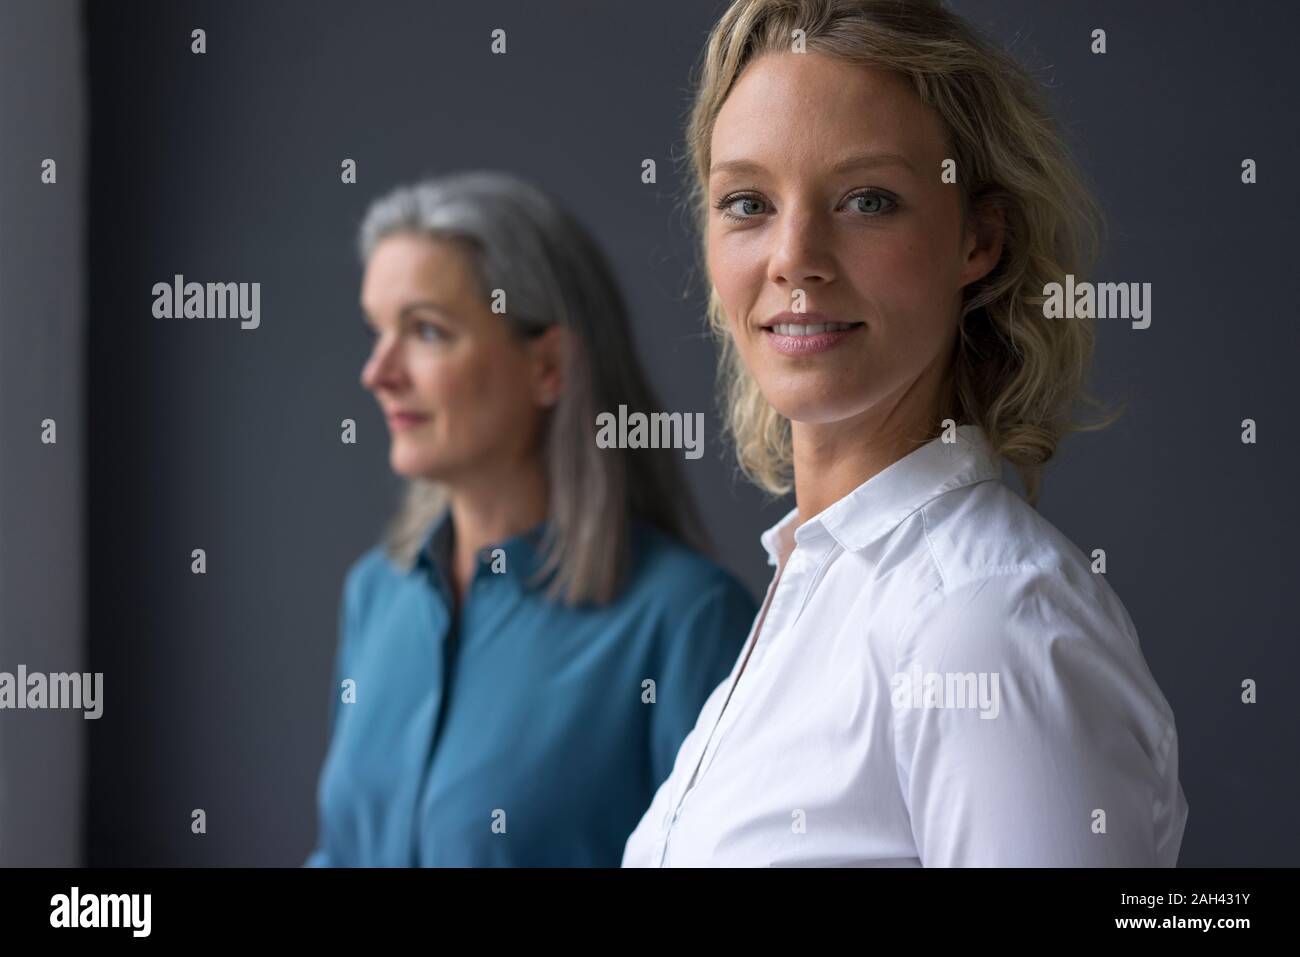 Portrait of smiling young businesswoman with mature businesswoman in background Stock Photo